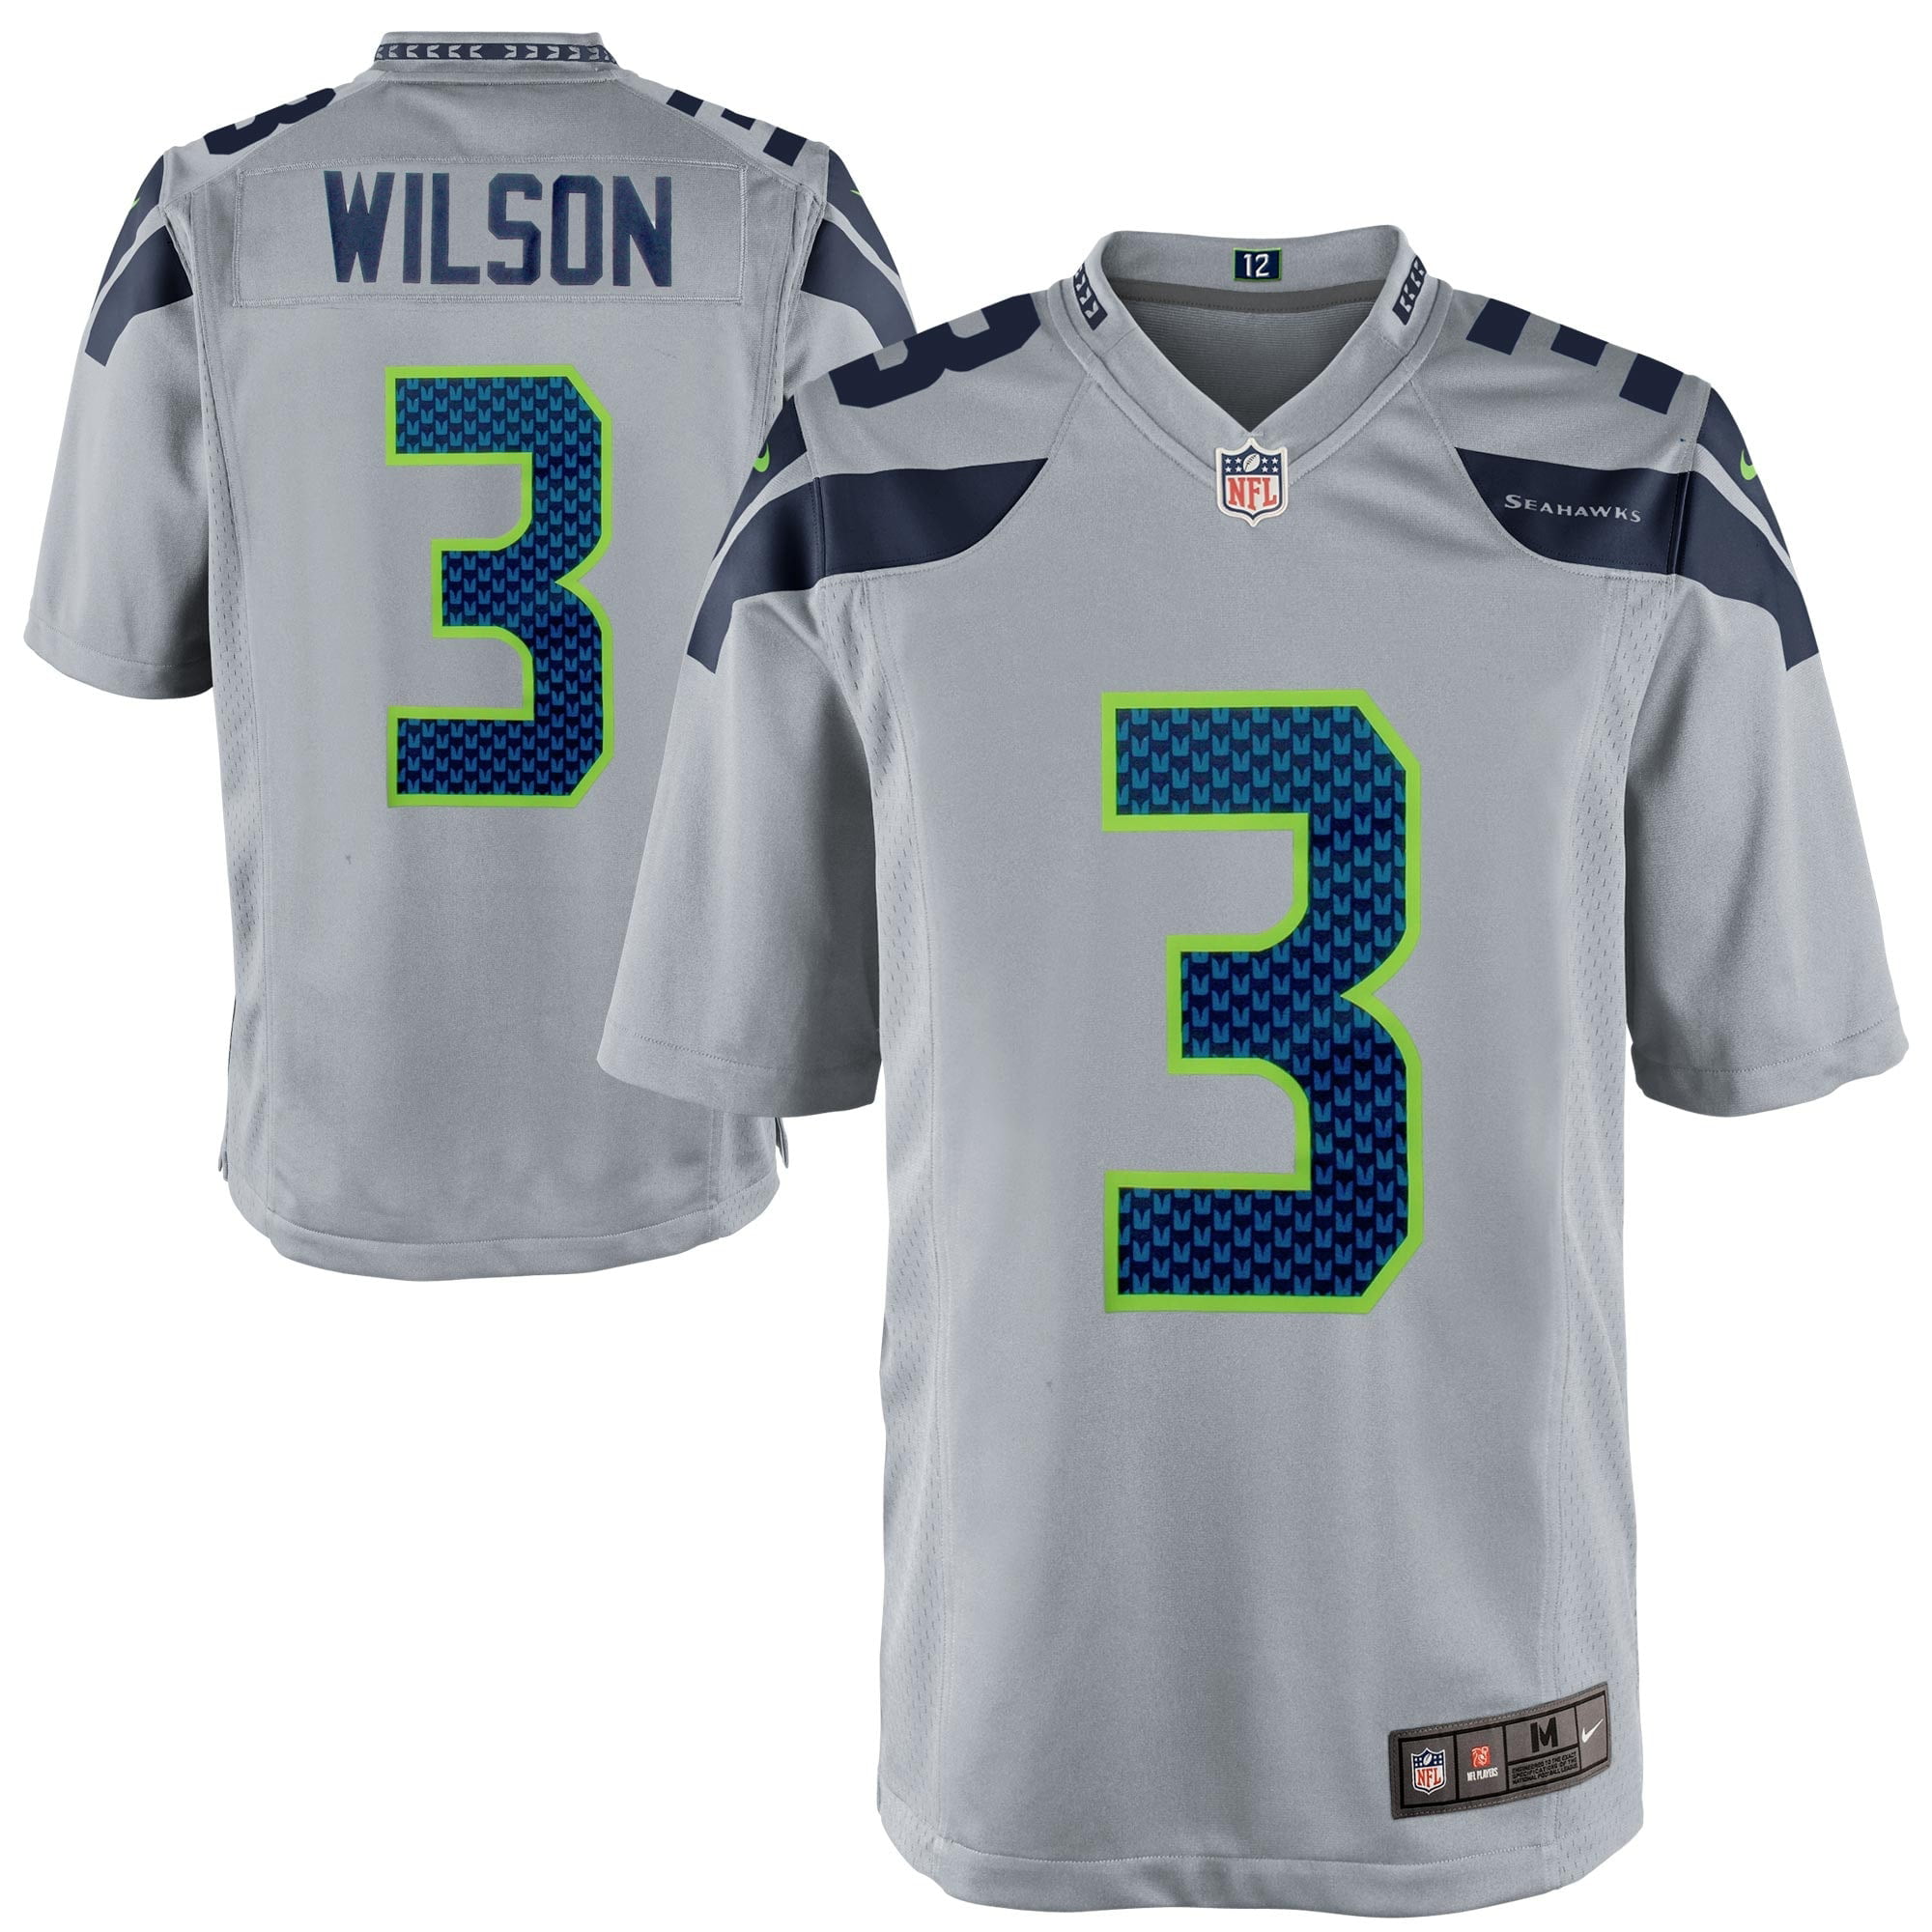 what size jersey does russell wilson wear